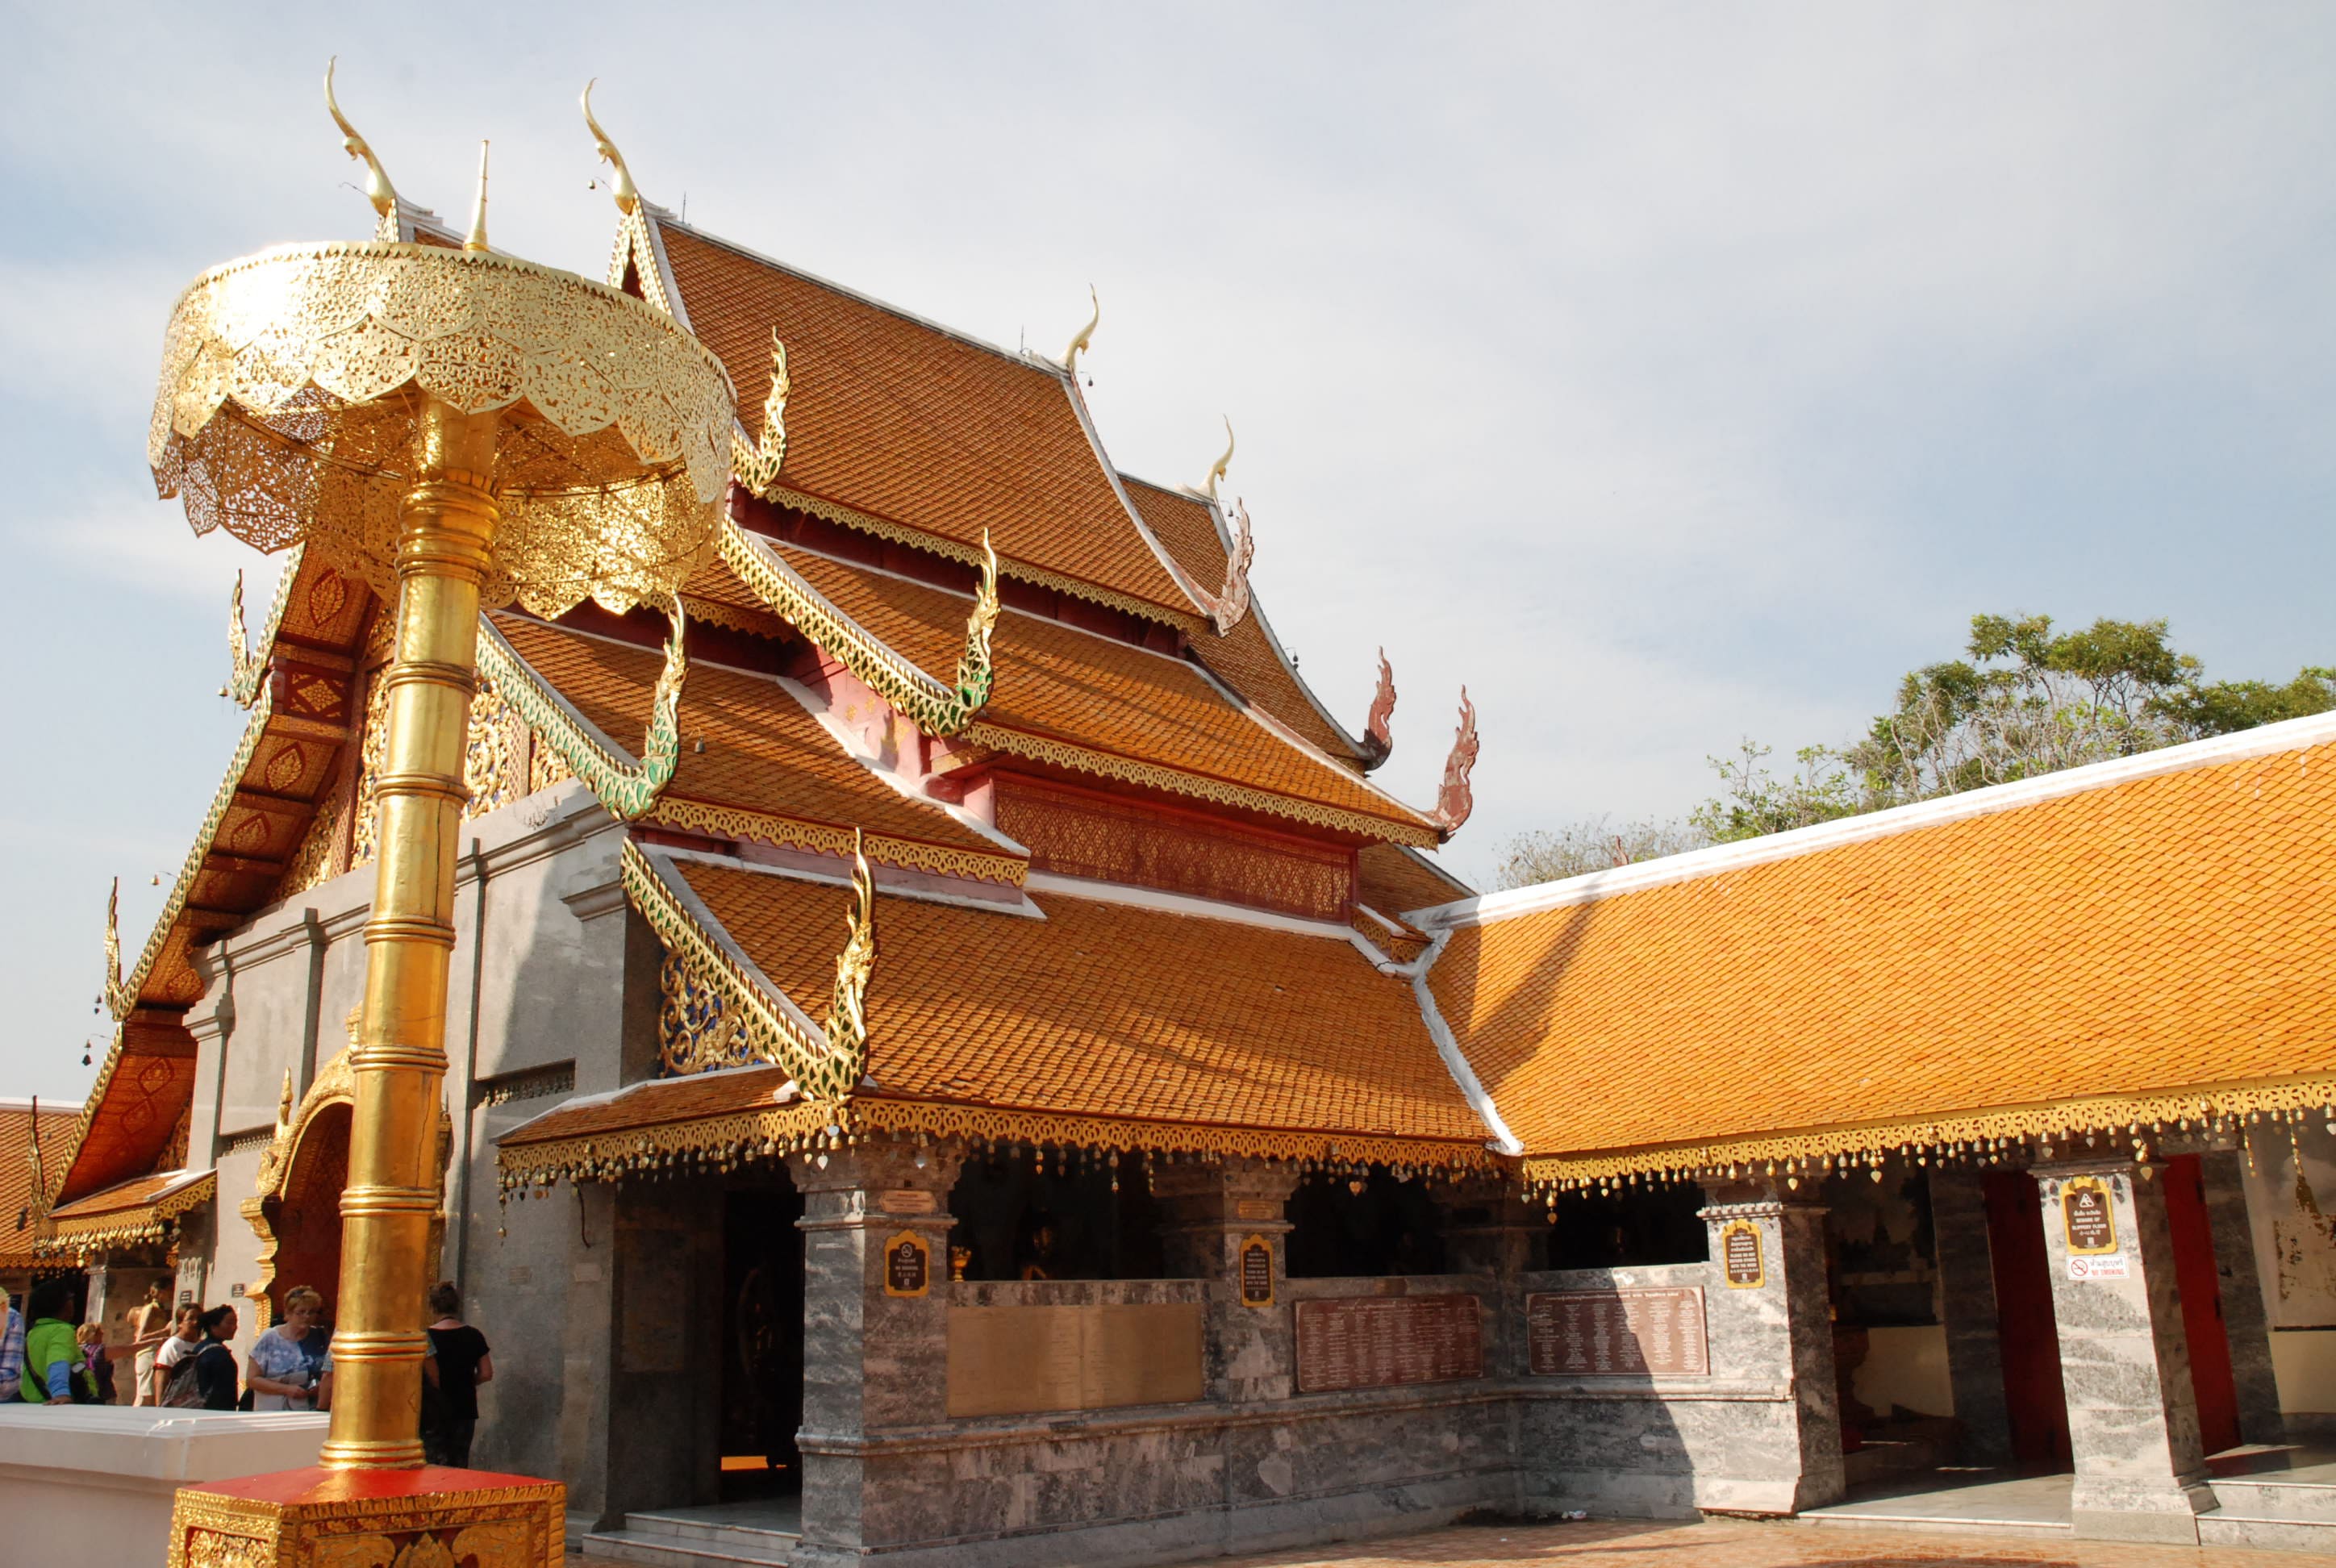 Chiang Mai is home to more than 300 ‘Wats’ scattered throughout the city